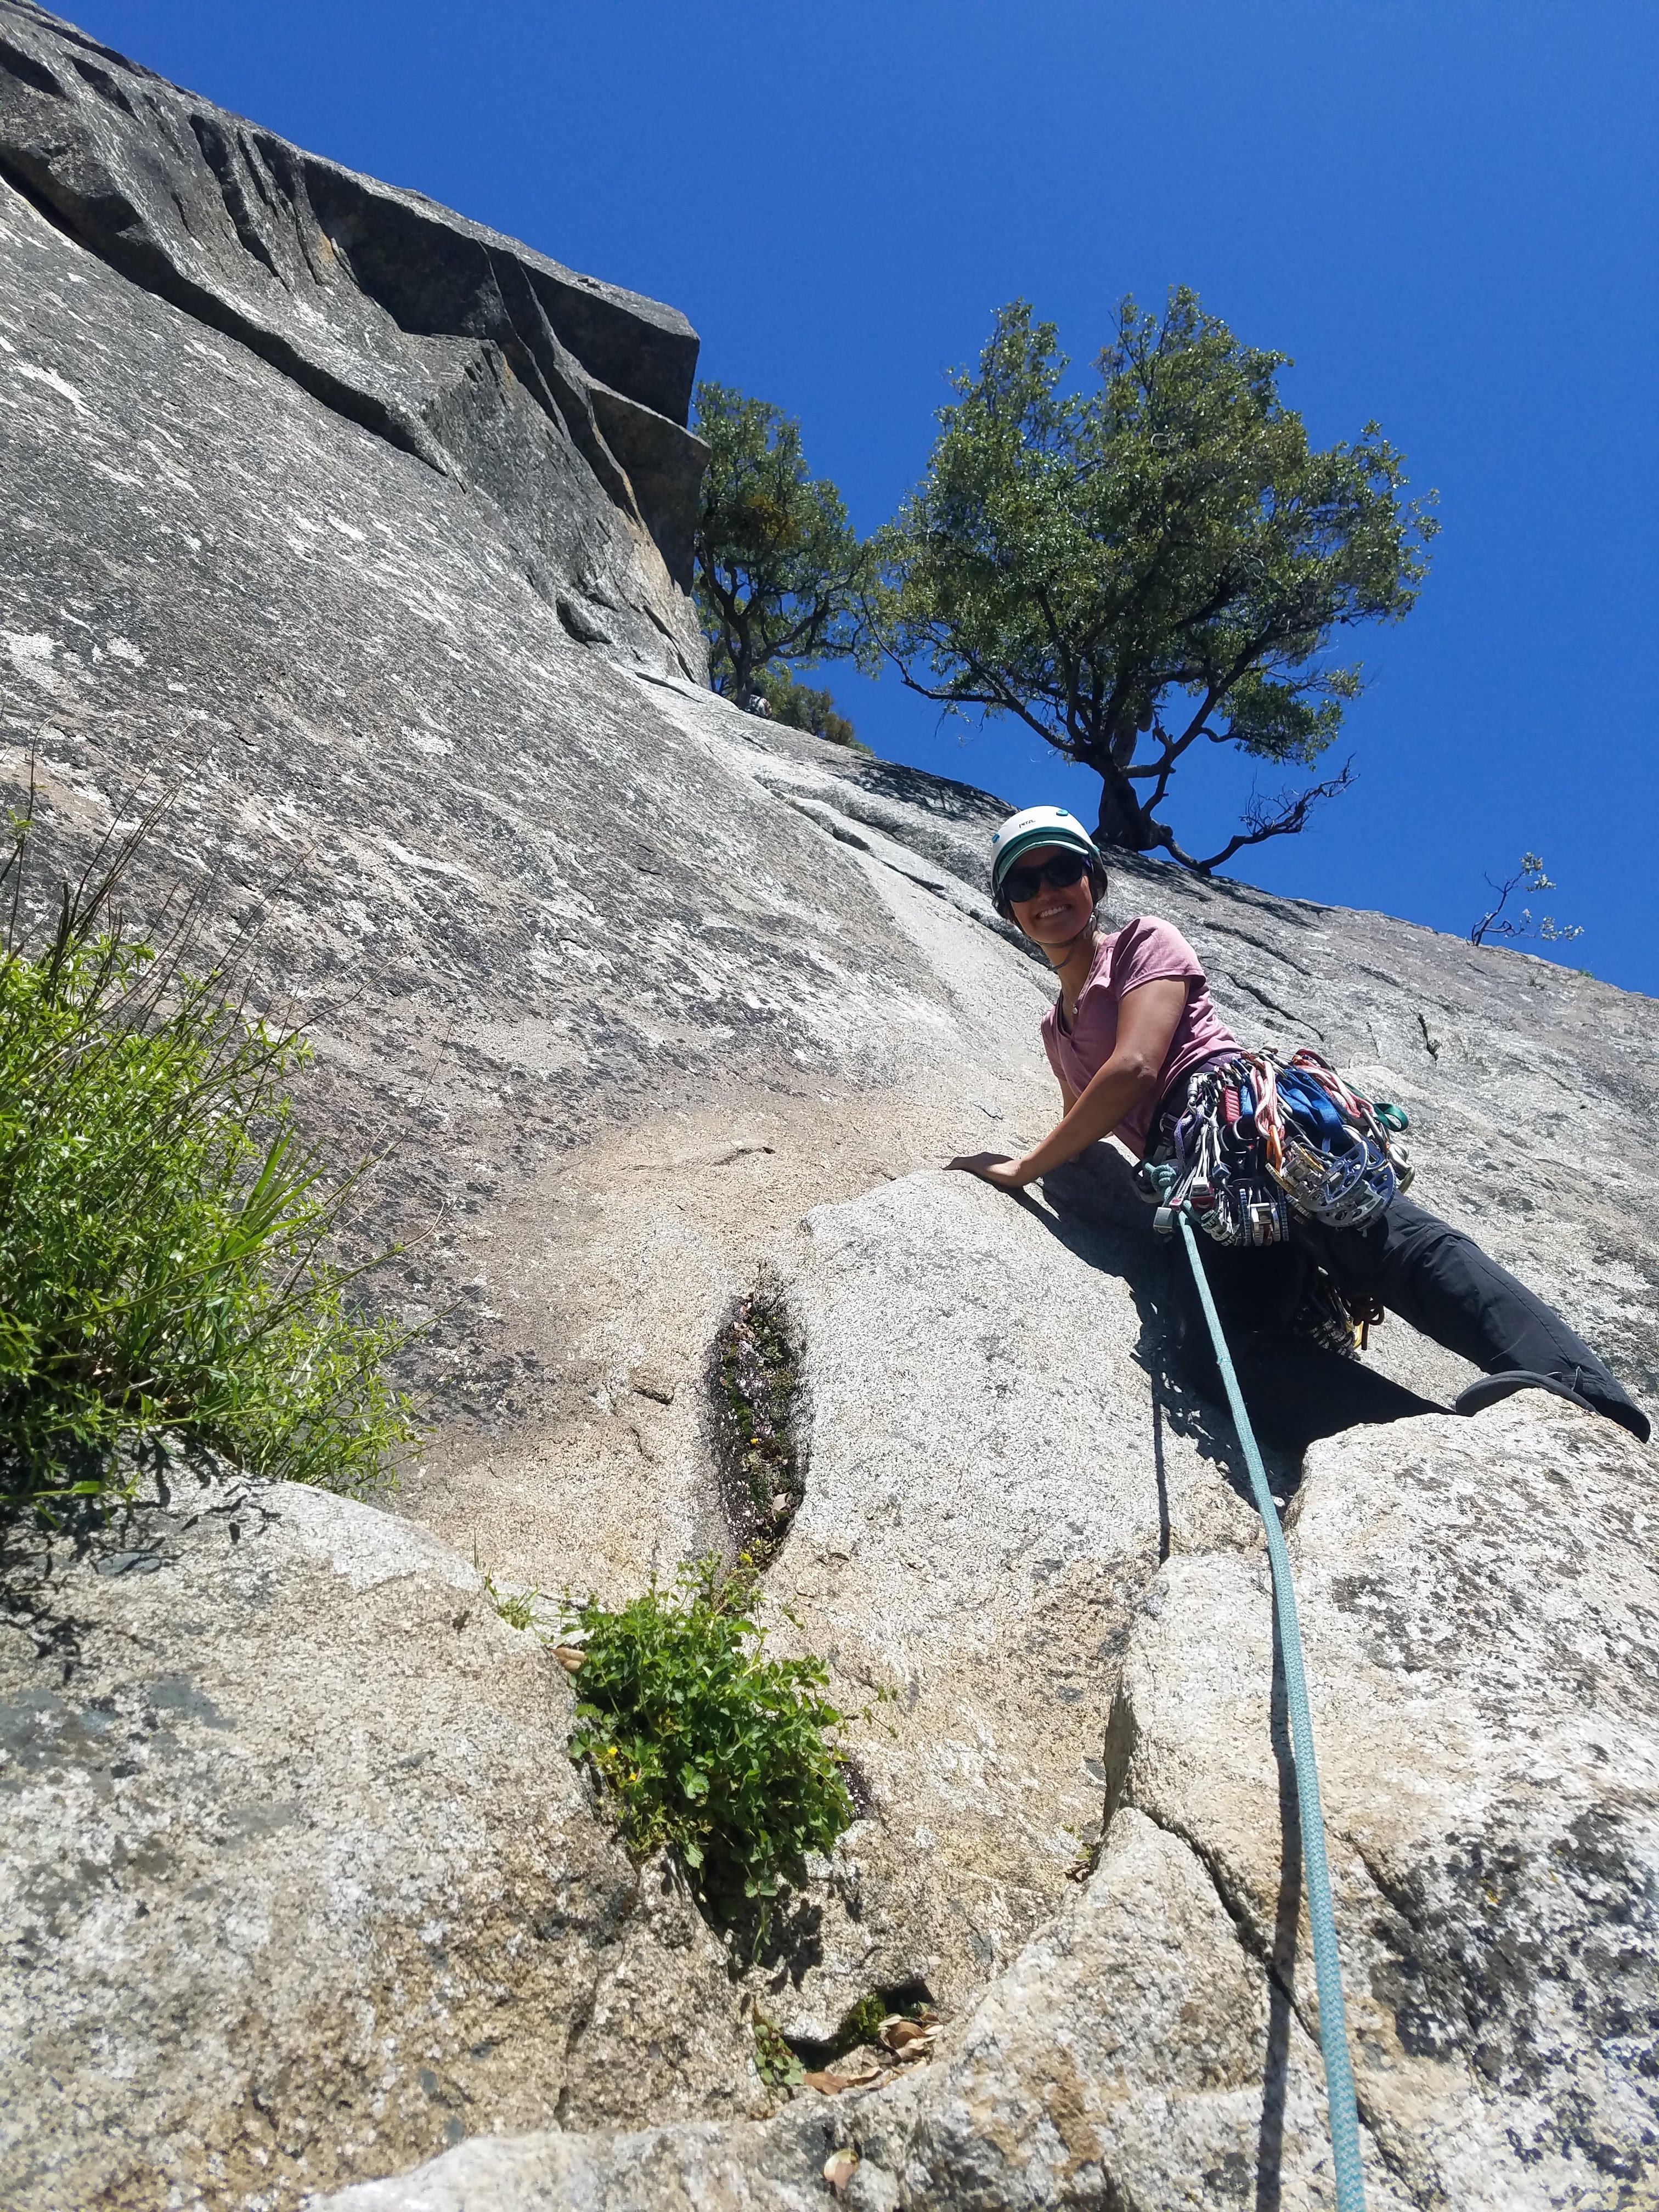 Our first climb in Yosemite was Munginella, a 5.6 two pitch climb. I'm not sure why it's called that, there was nothing 'munge' about it. I loved it.